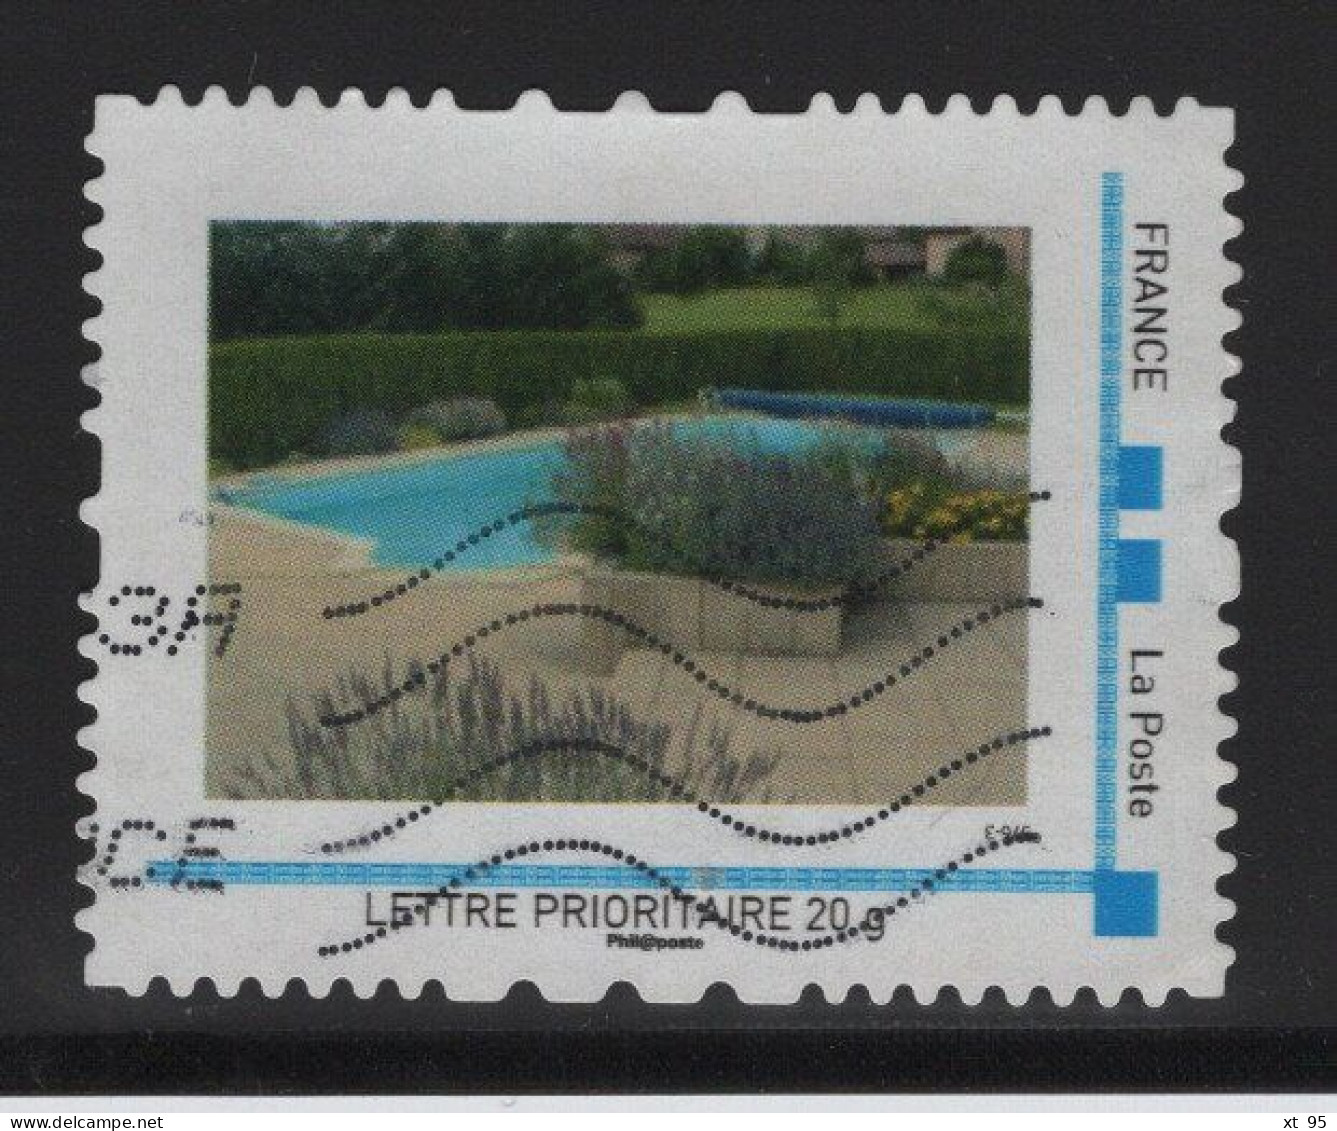 Timbre Personnalise Oblitere - Lettre Prioritaire 20g - Piscine - Used Stamps